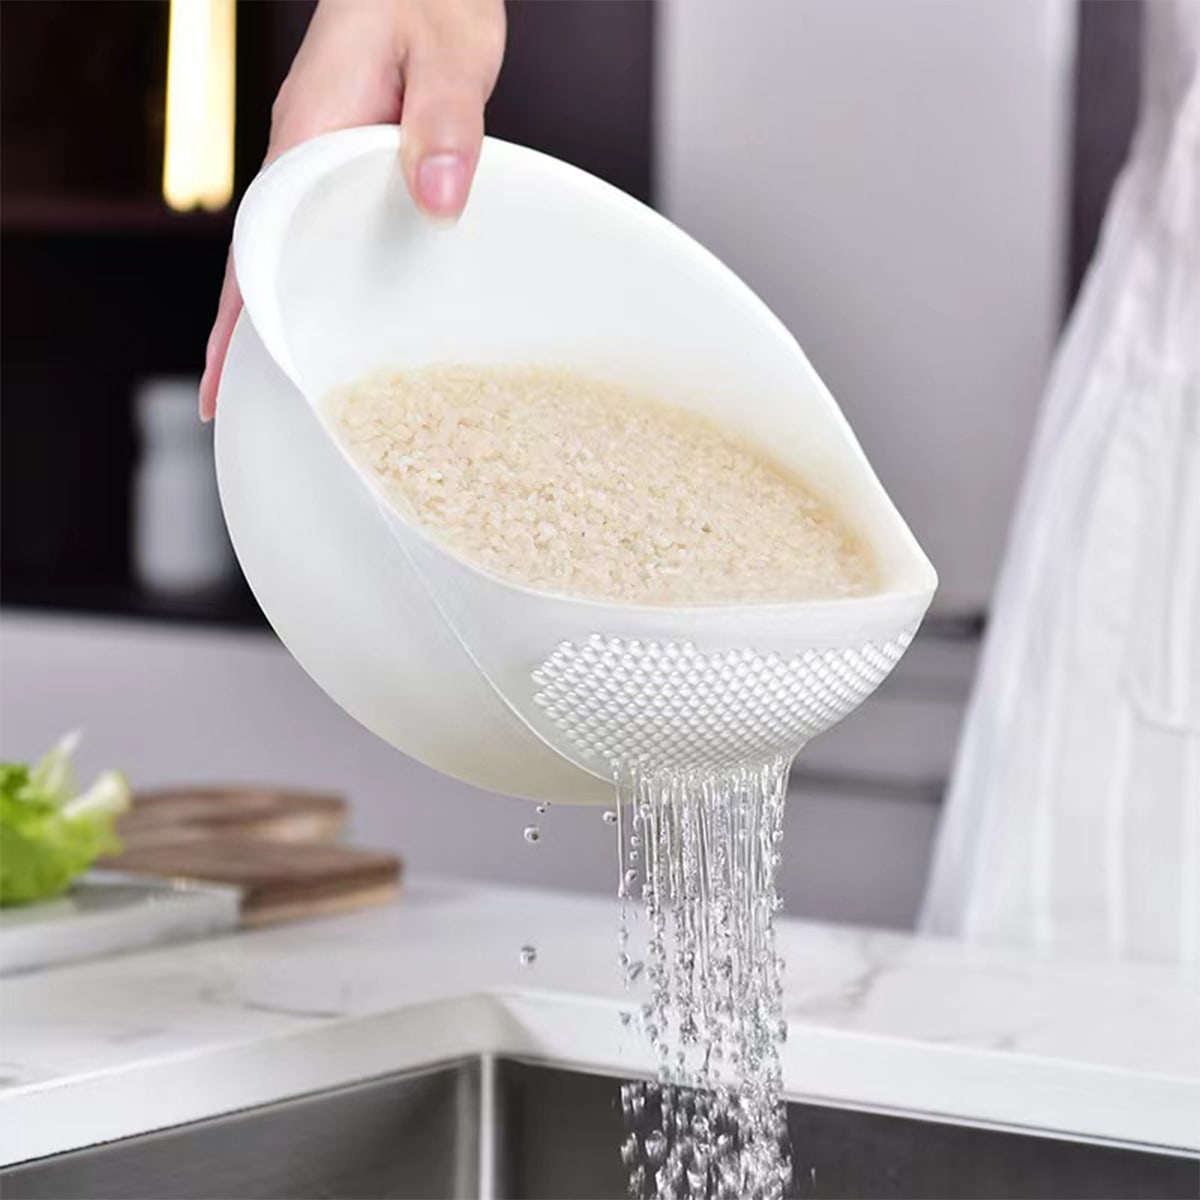 Rice being washed with the help of Plastic Rice Washing Strainer Basket